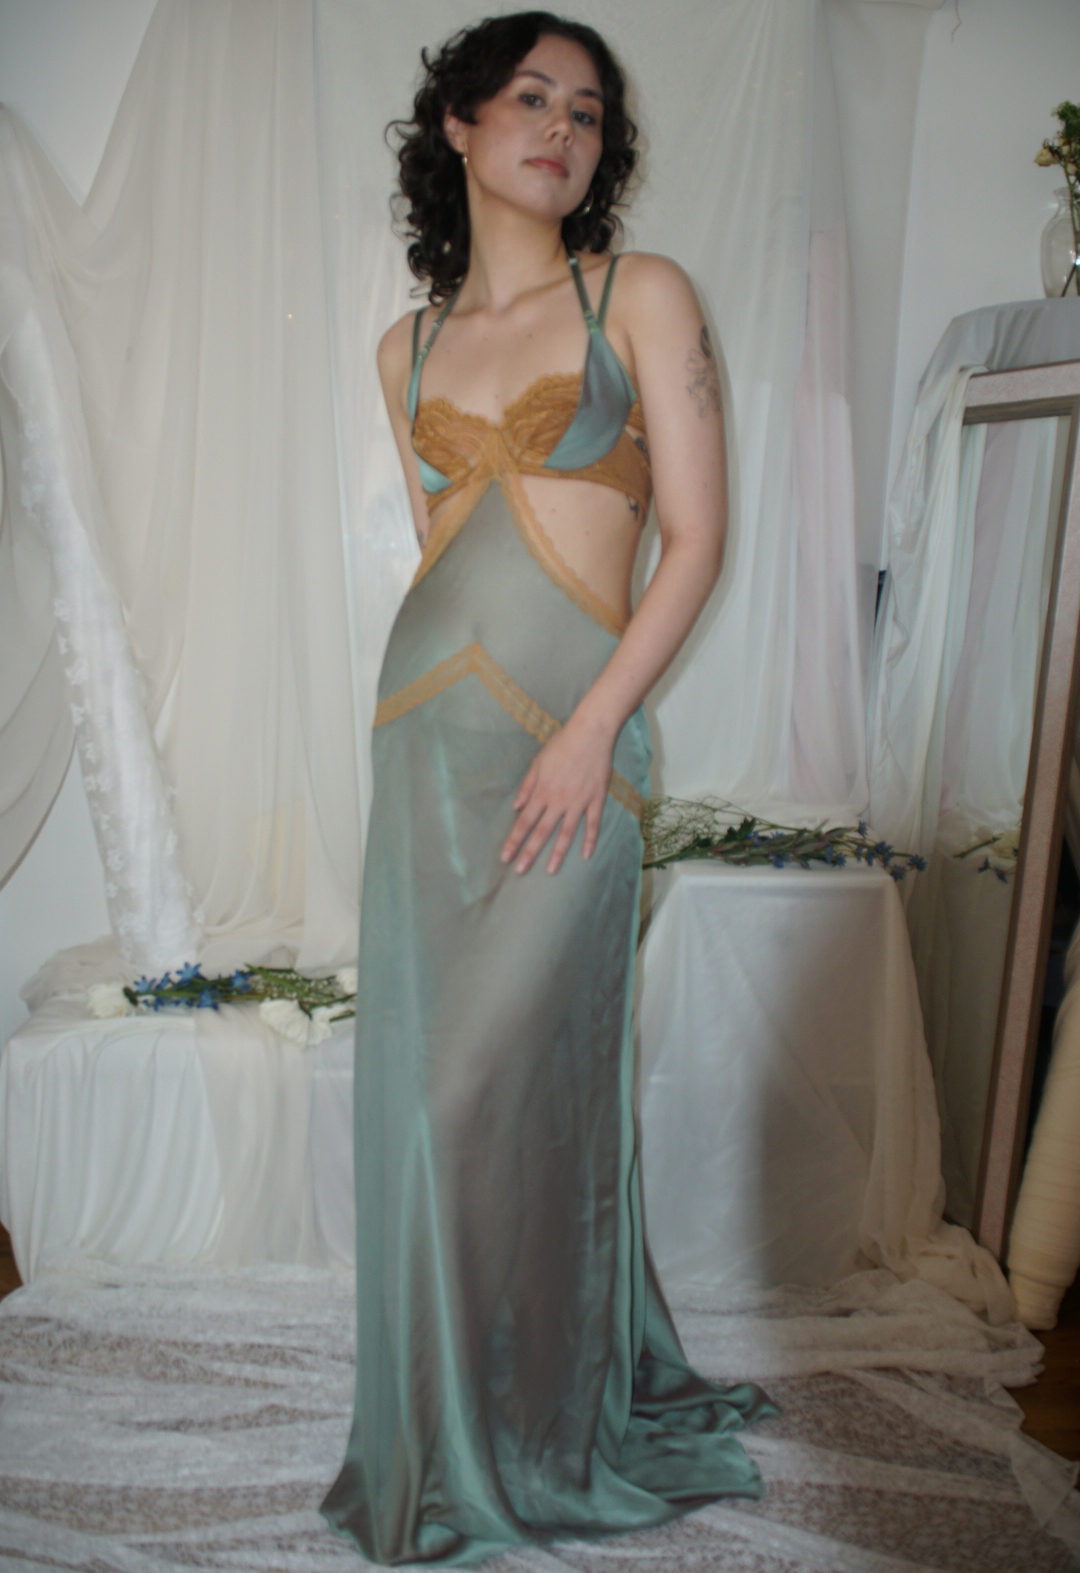 A sheer green chiffon slip down with an underwire bra and sling.